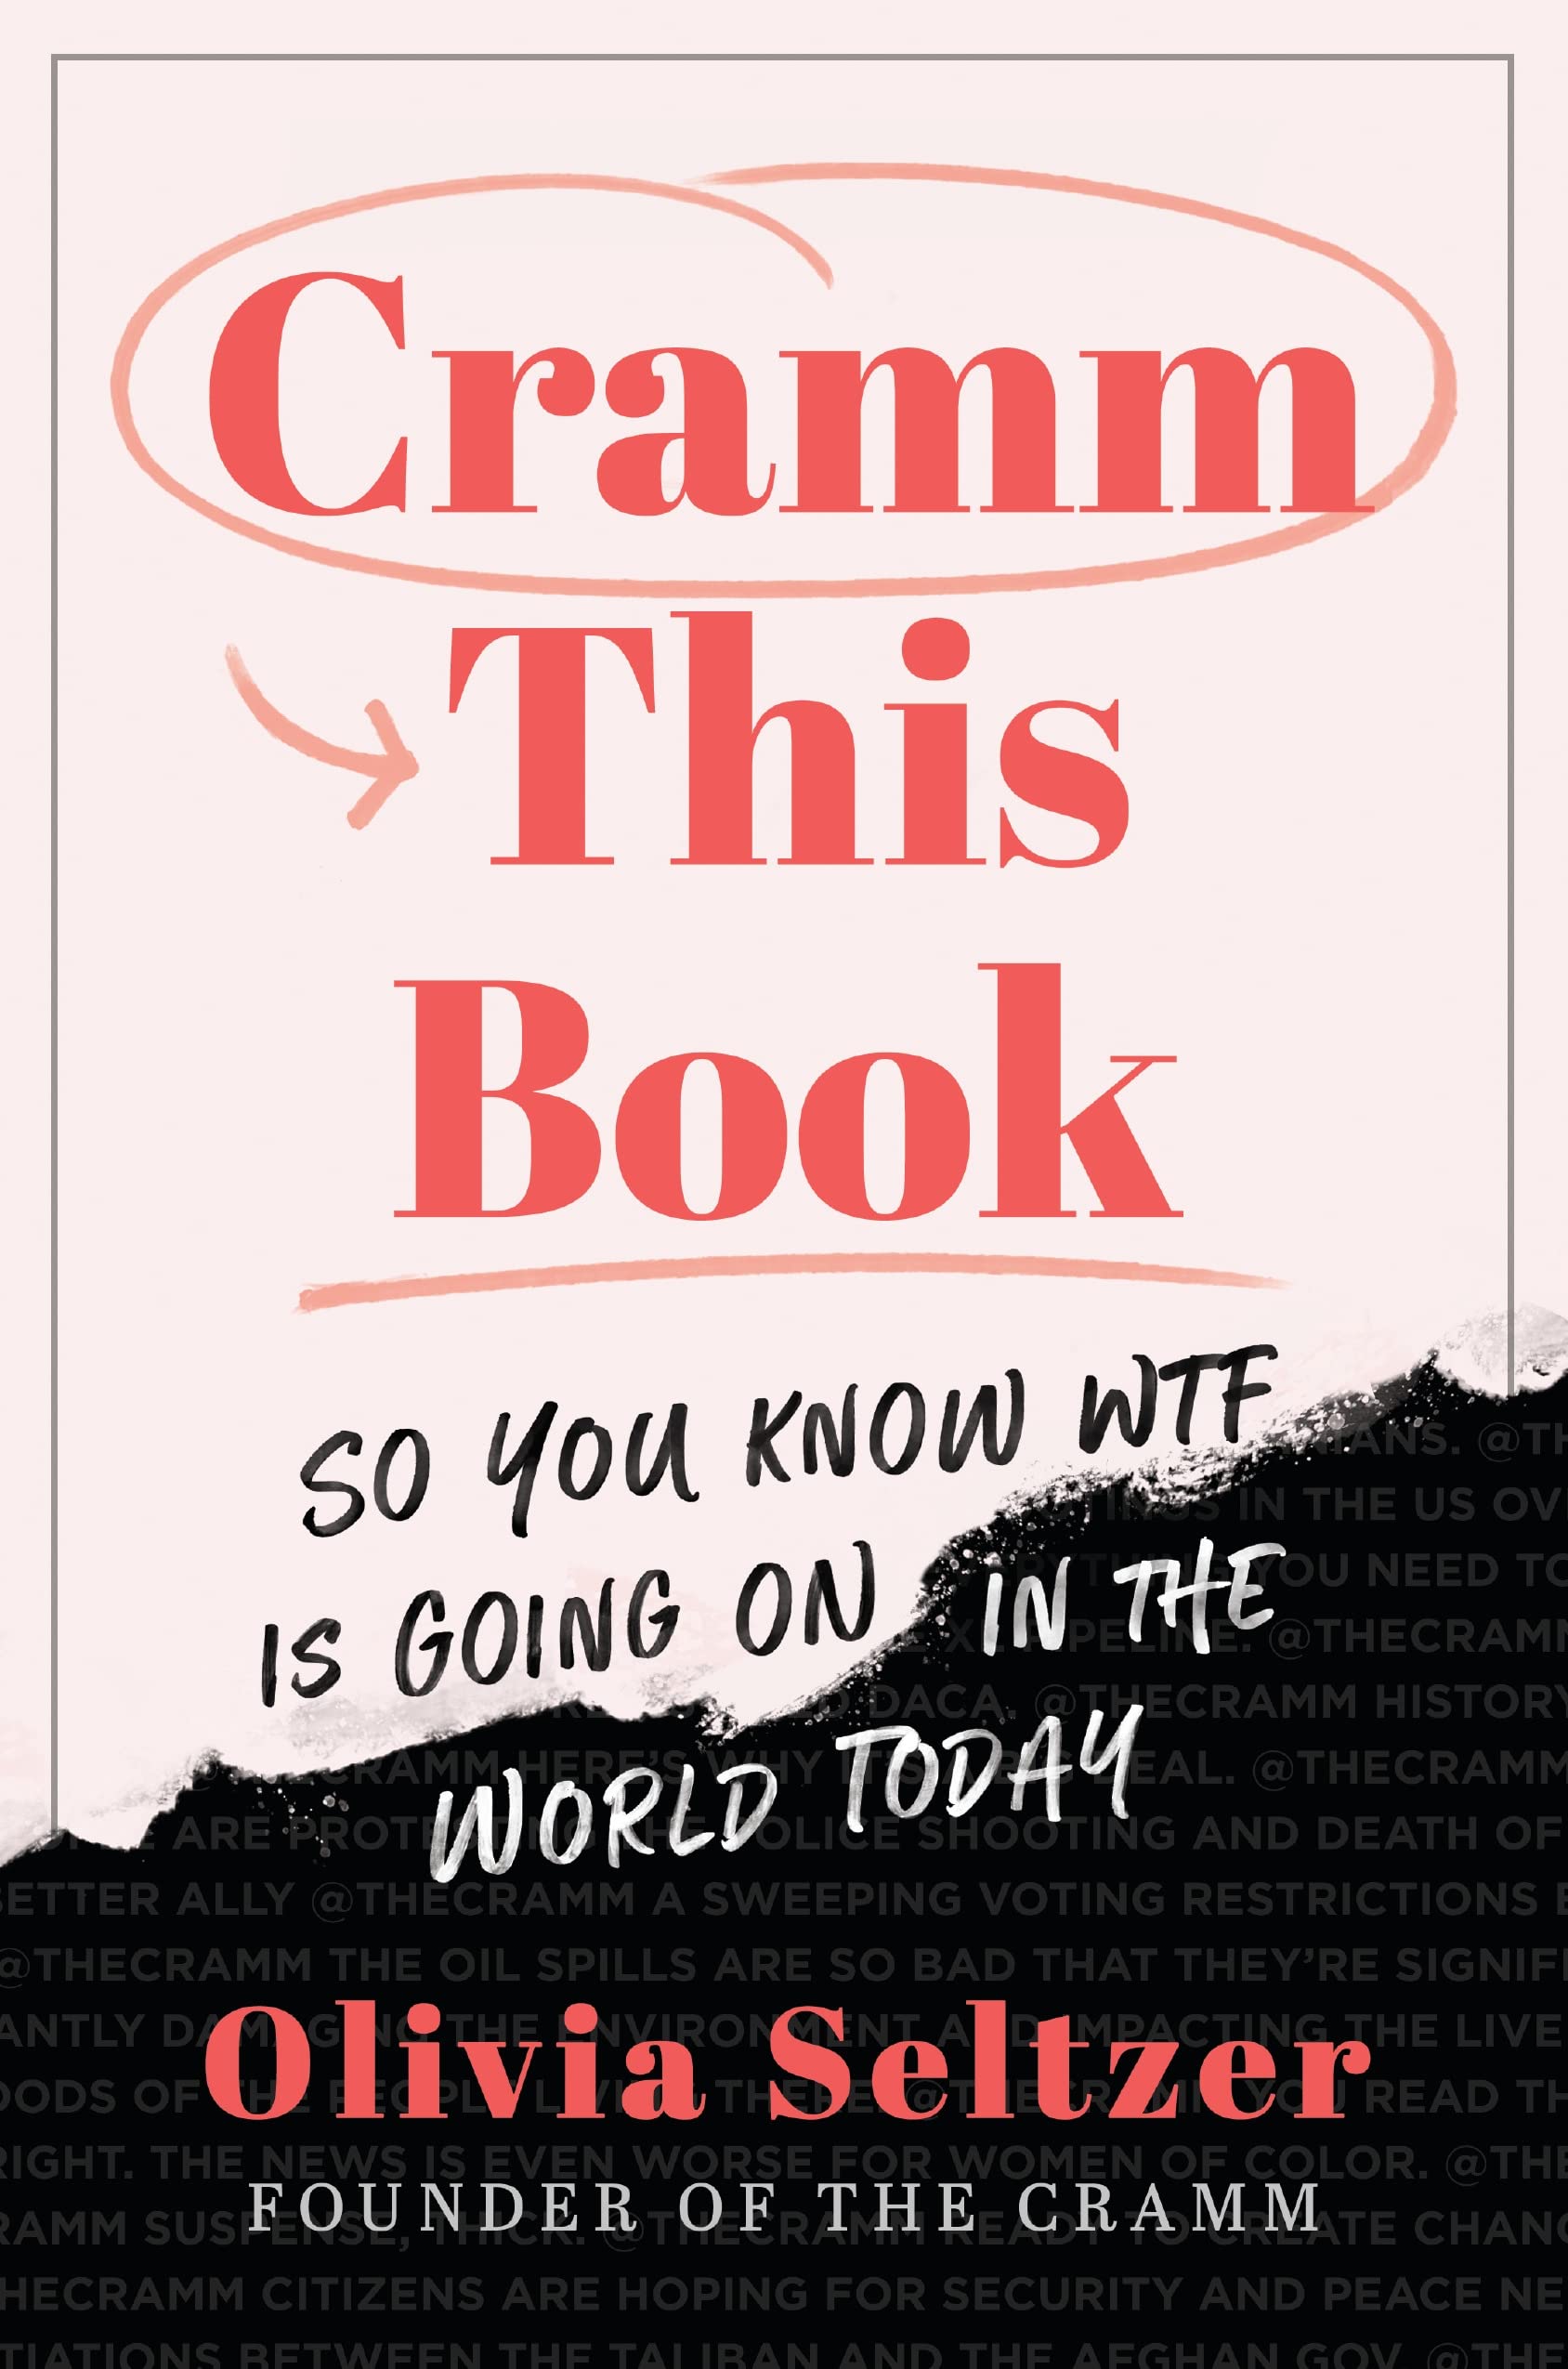 Cover of “Cramm This Book” by Olivia Seltzer